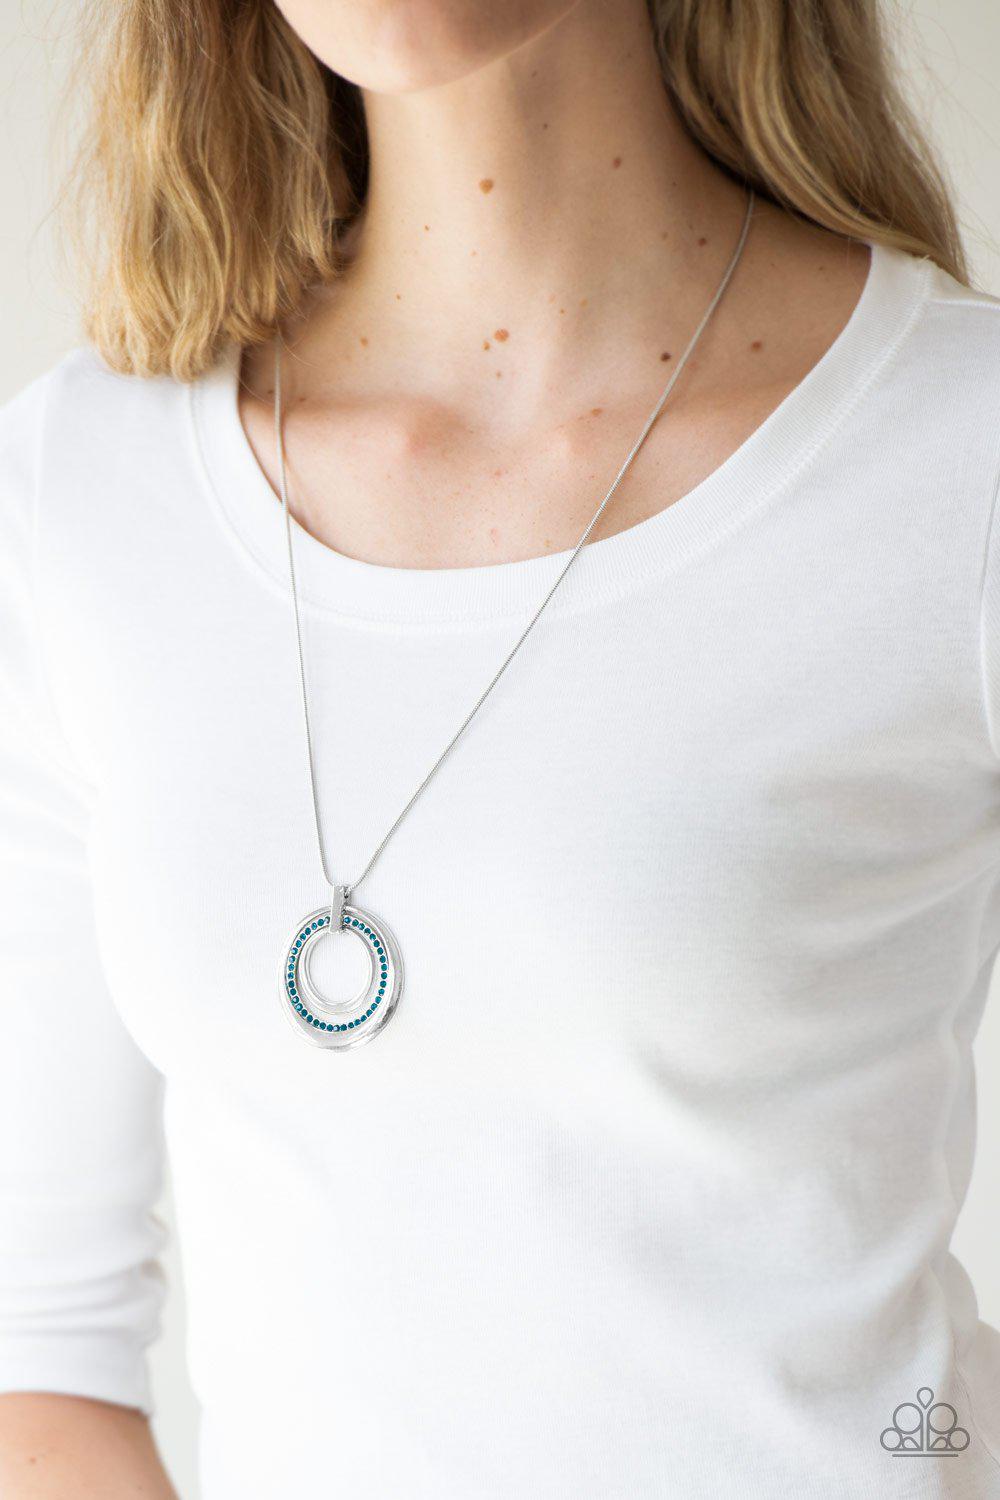 Gather Around Gorgeous Blue and Silver Pendant Necklace - Paparazzi Accessories- lightbox - CarasShop.com - $5 Jewelry by Cara Jewels